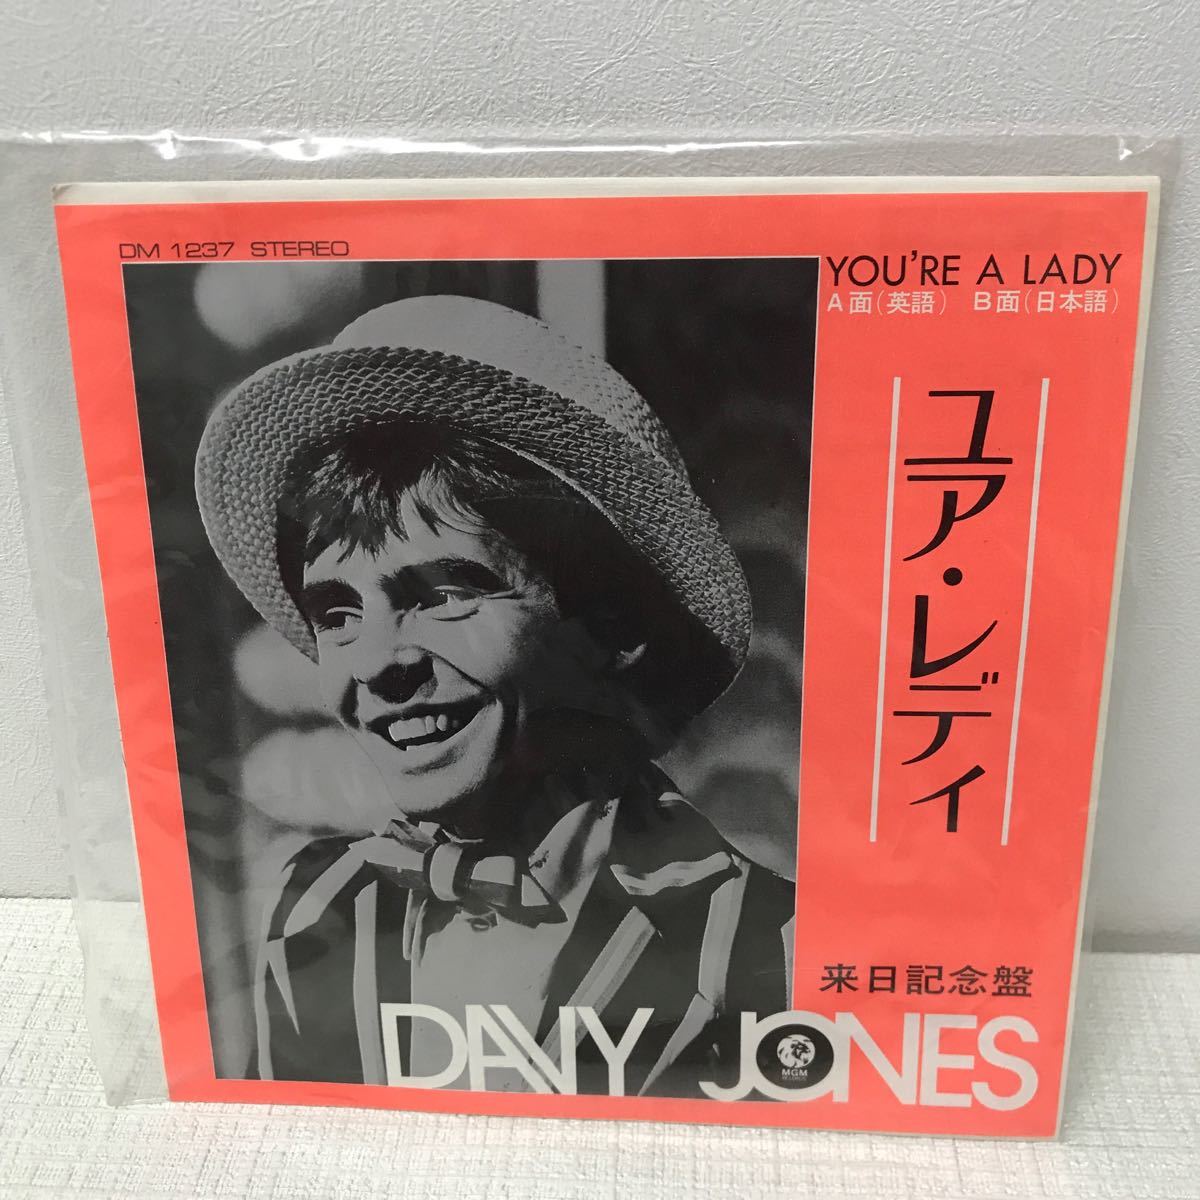 I0116H3 ユア・レディ YOU'RE A LADY (IN ENGLISH) / (IN JAPANESE) DAVY JONES EP レコード 音楽 洋楽 国内盤 DM1237_画像1